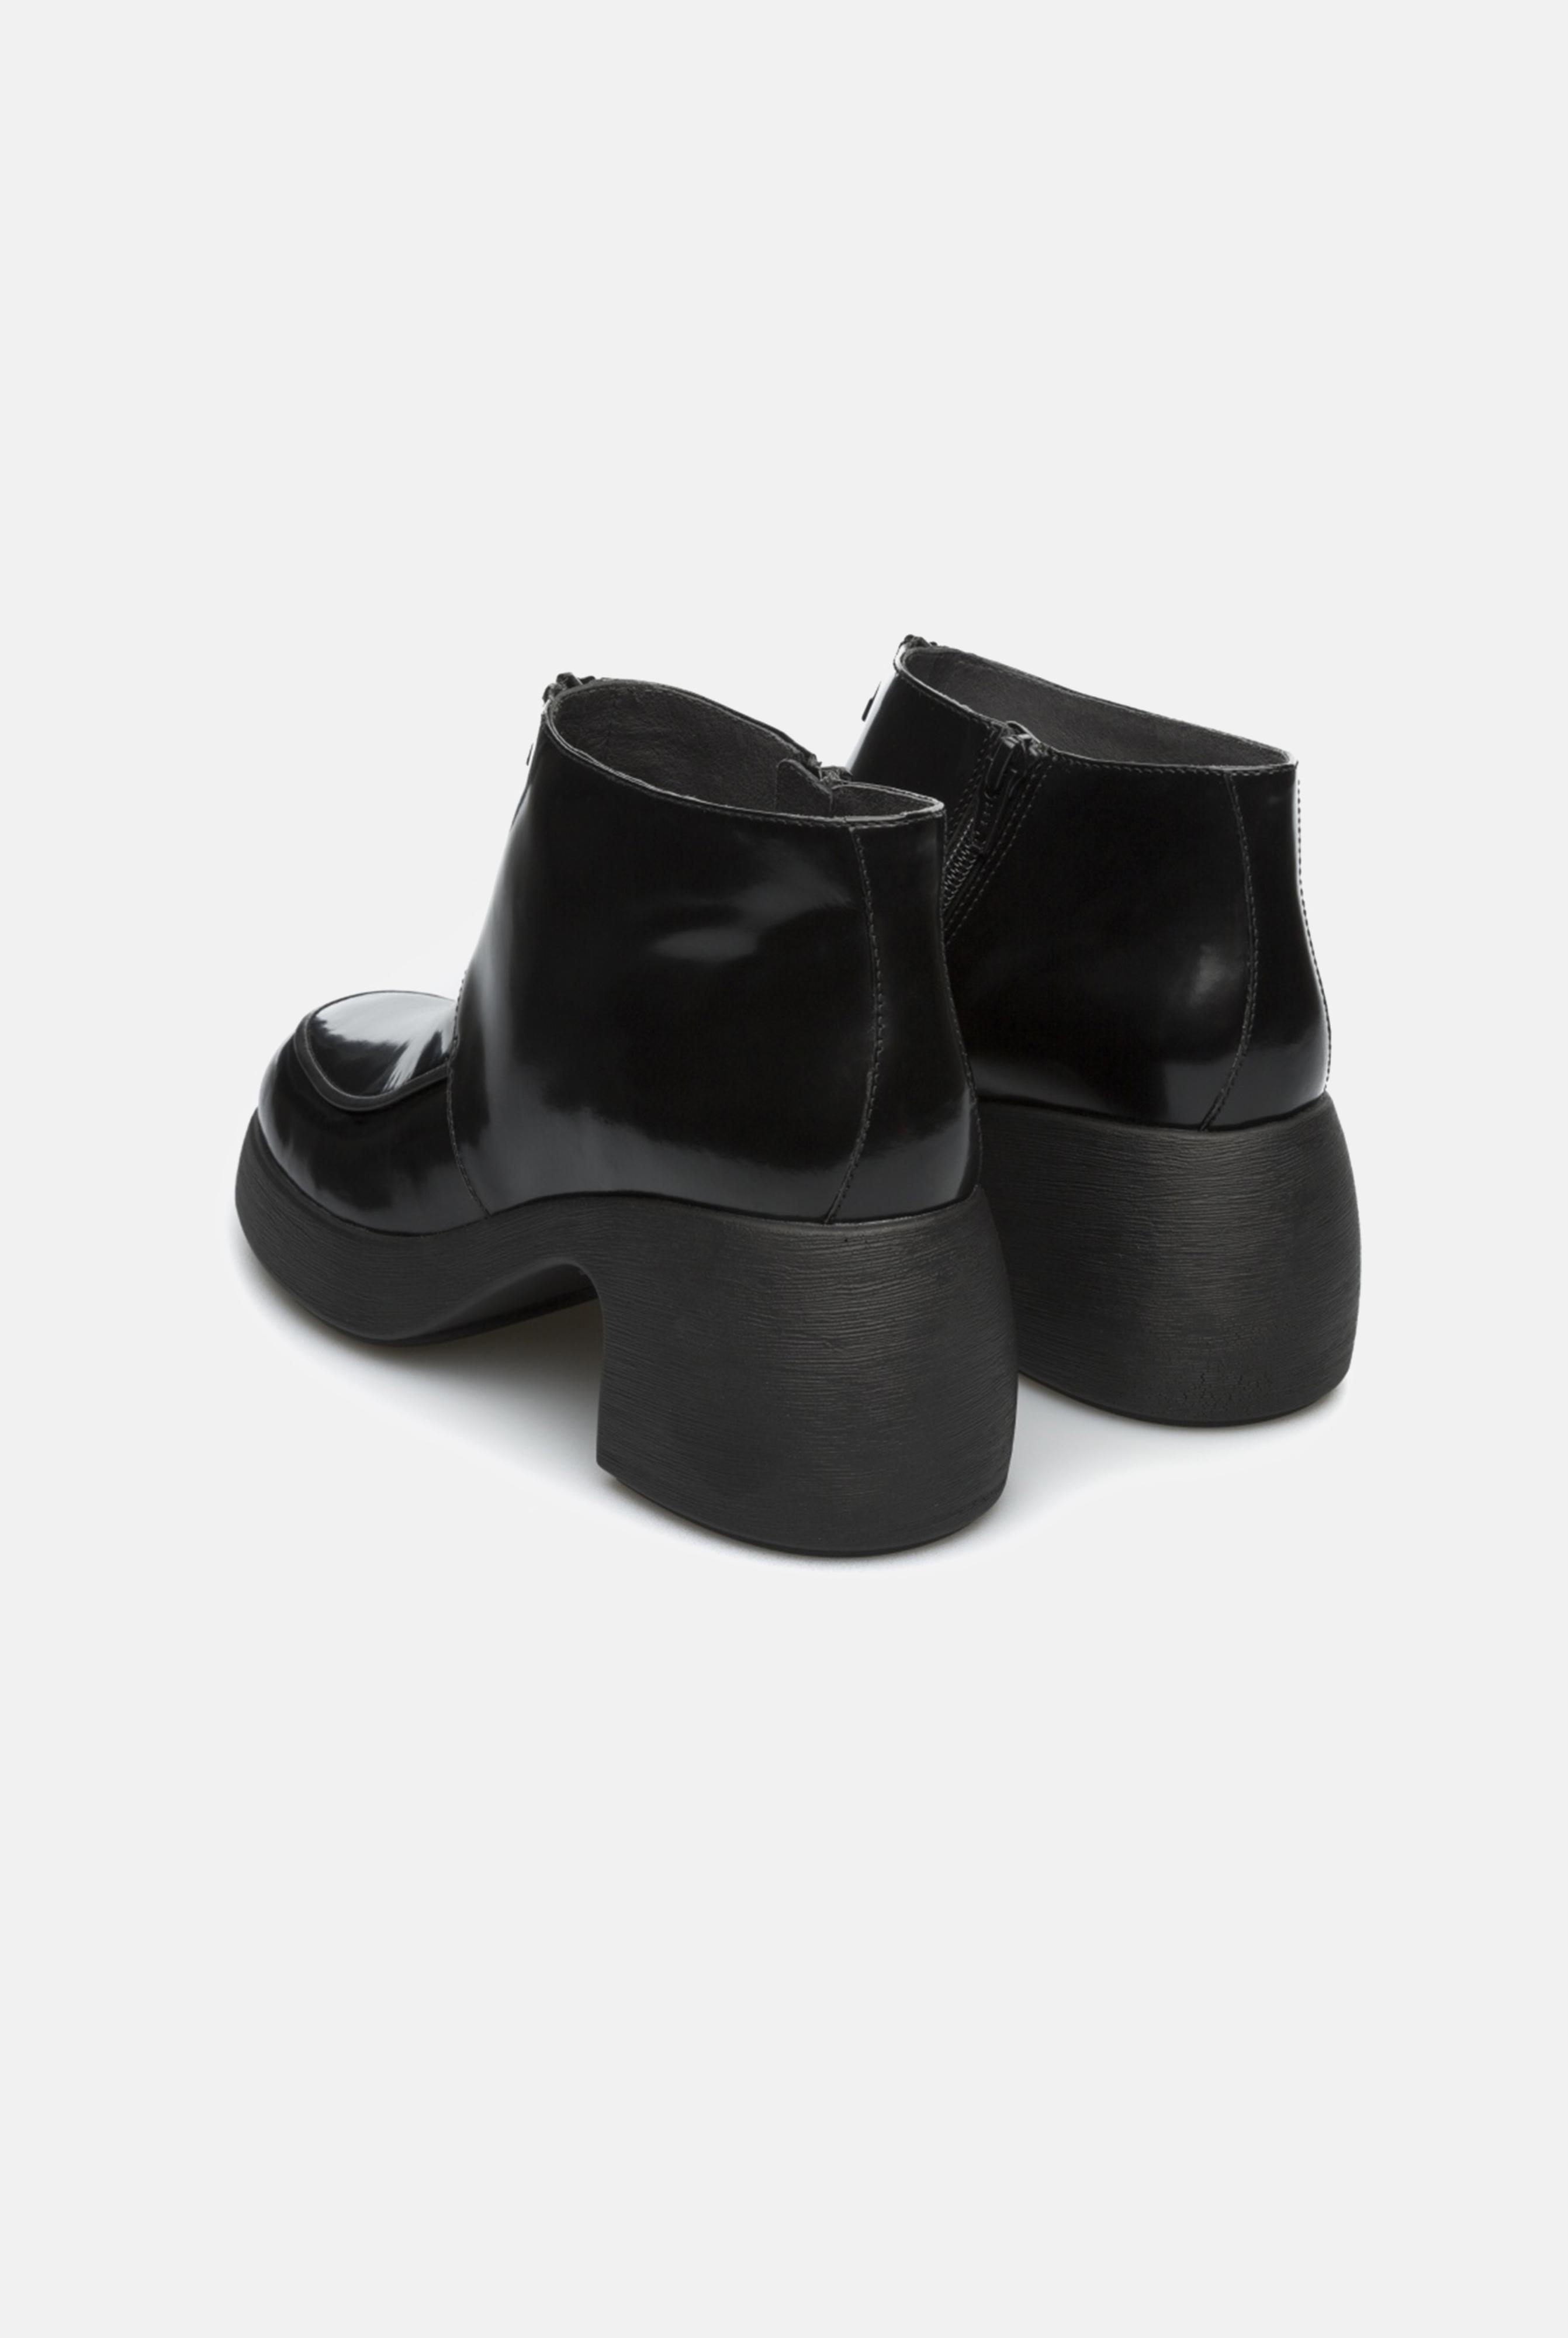 Camper Leather Black Thelma Boots - Lyst